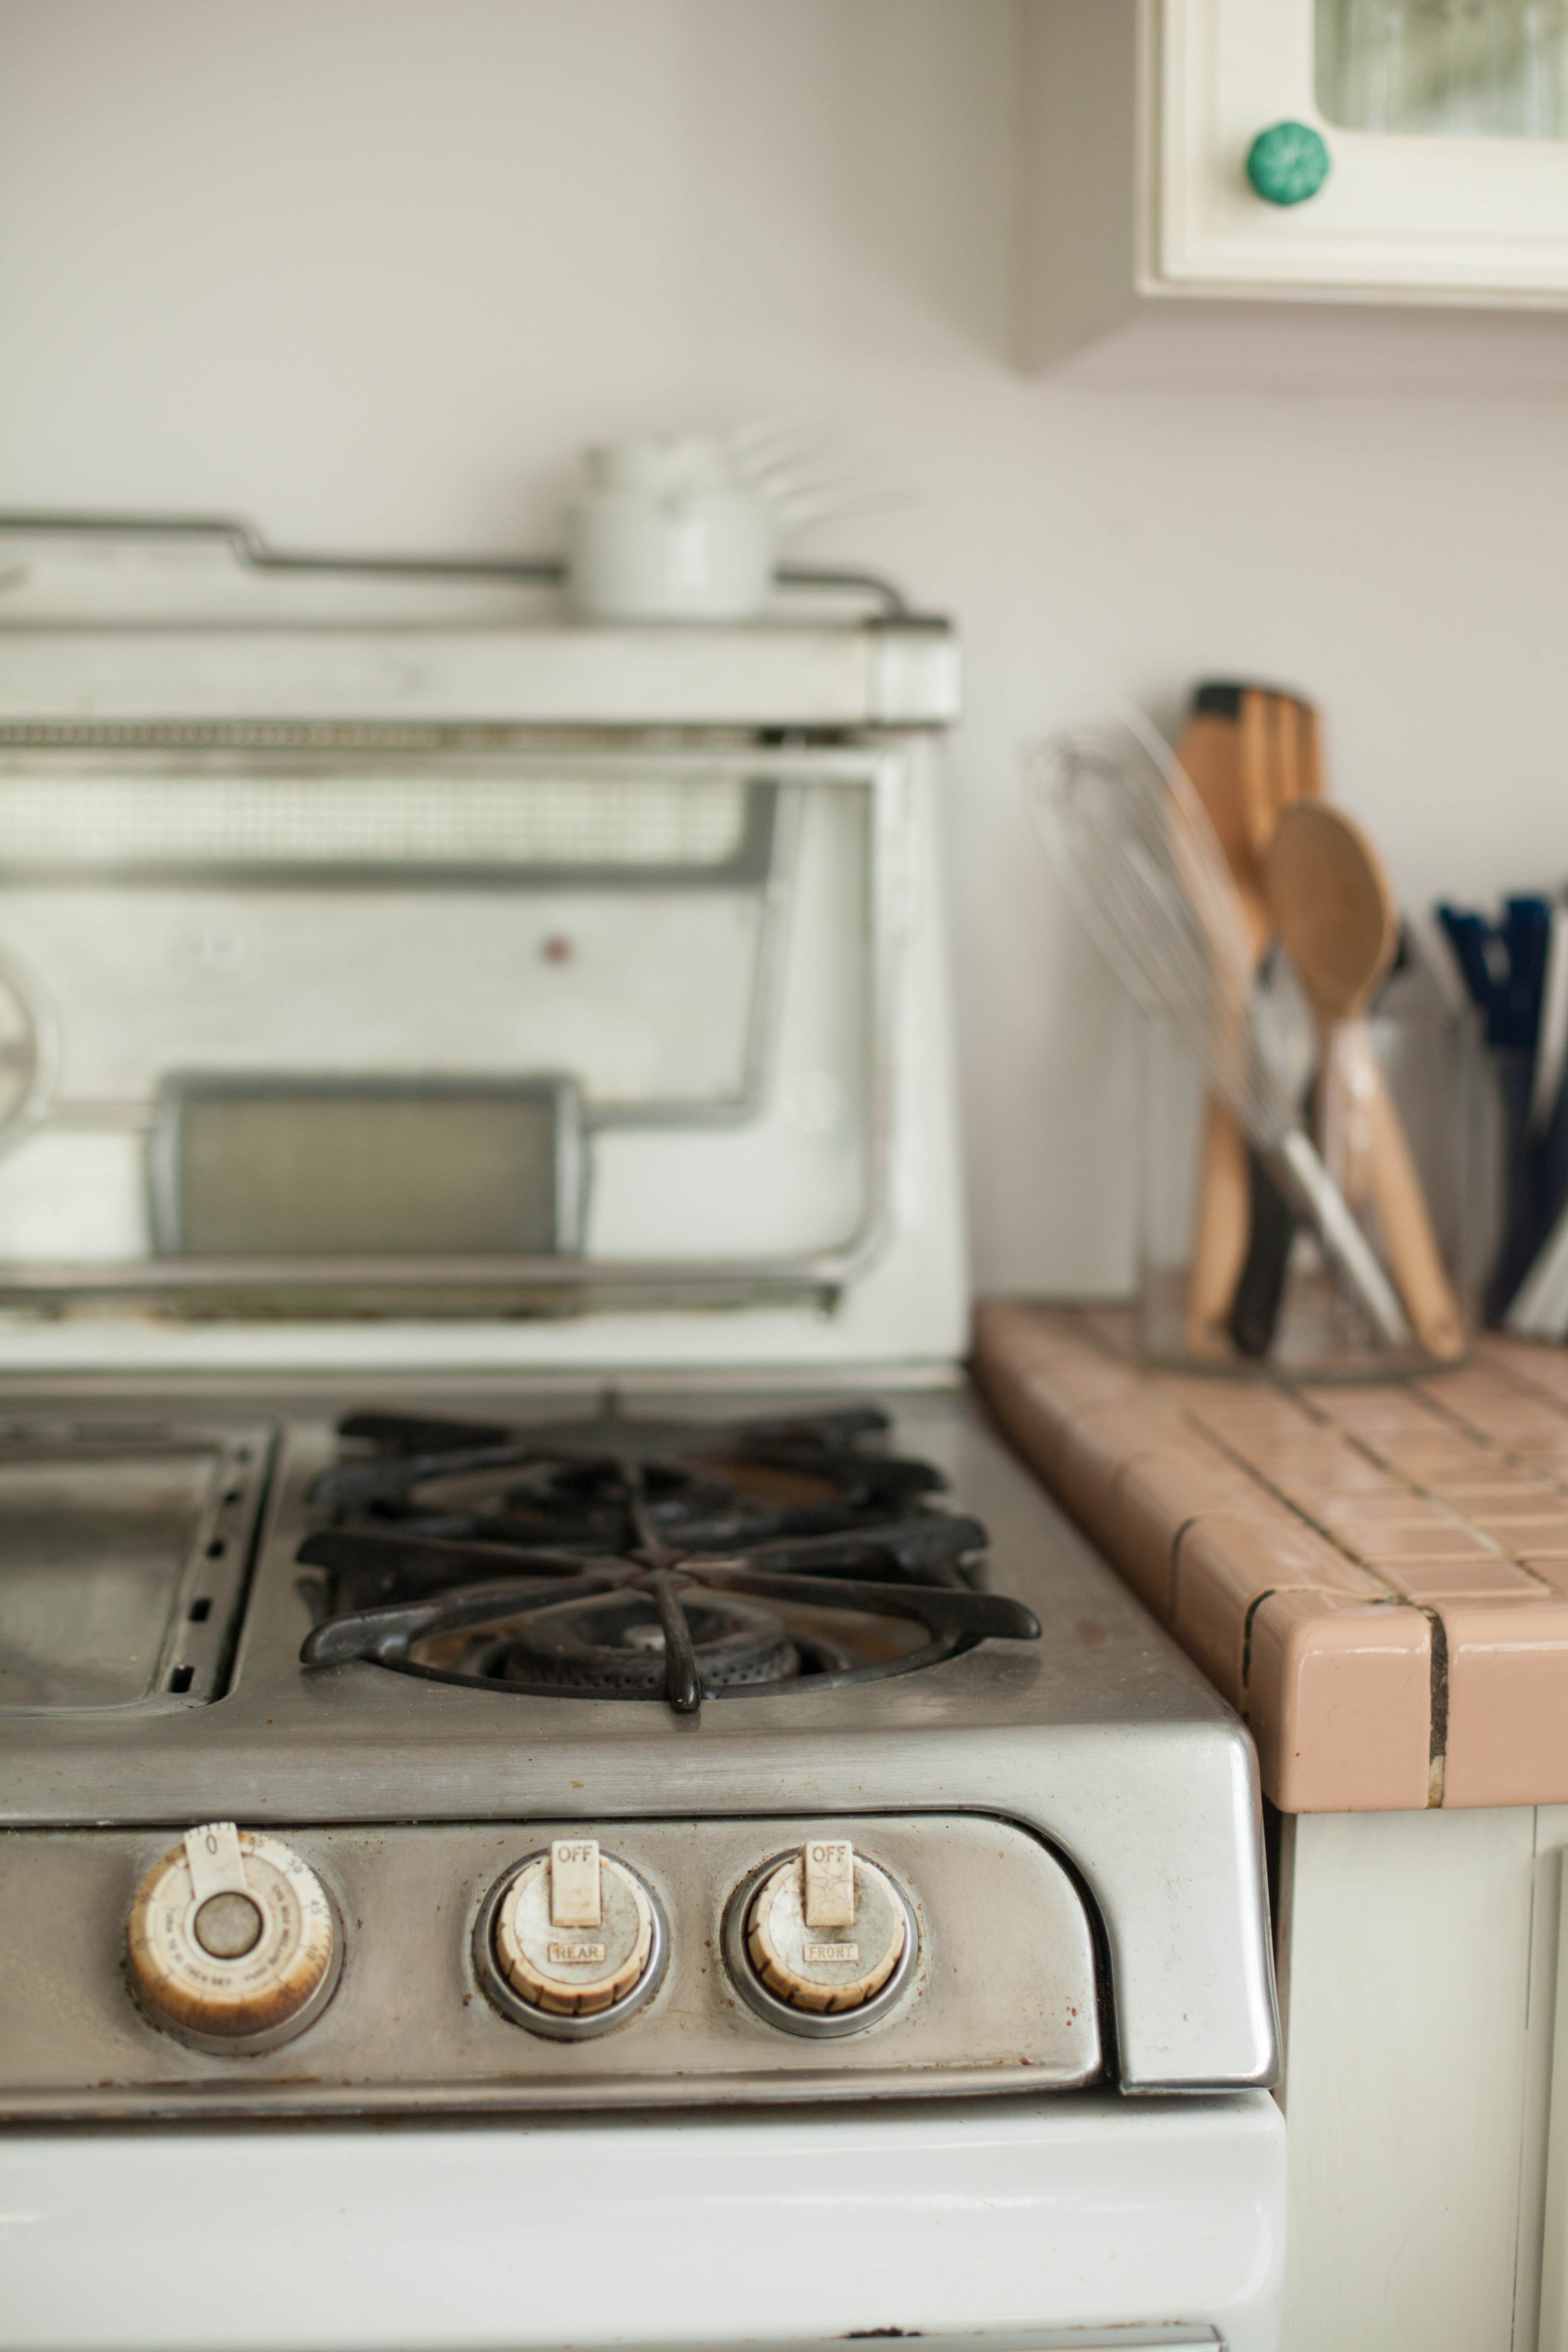 How Long Can a Landlord Leave You Without an Oven?